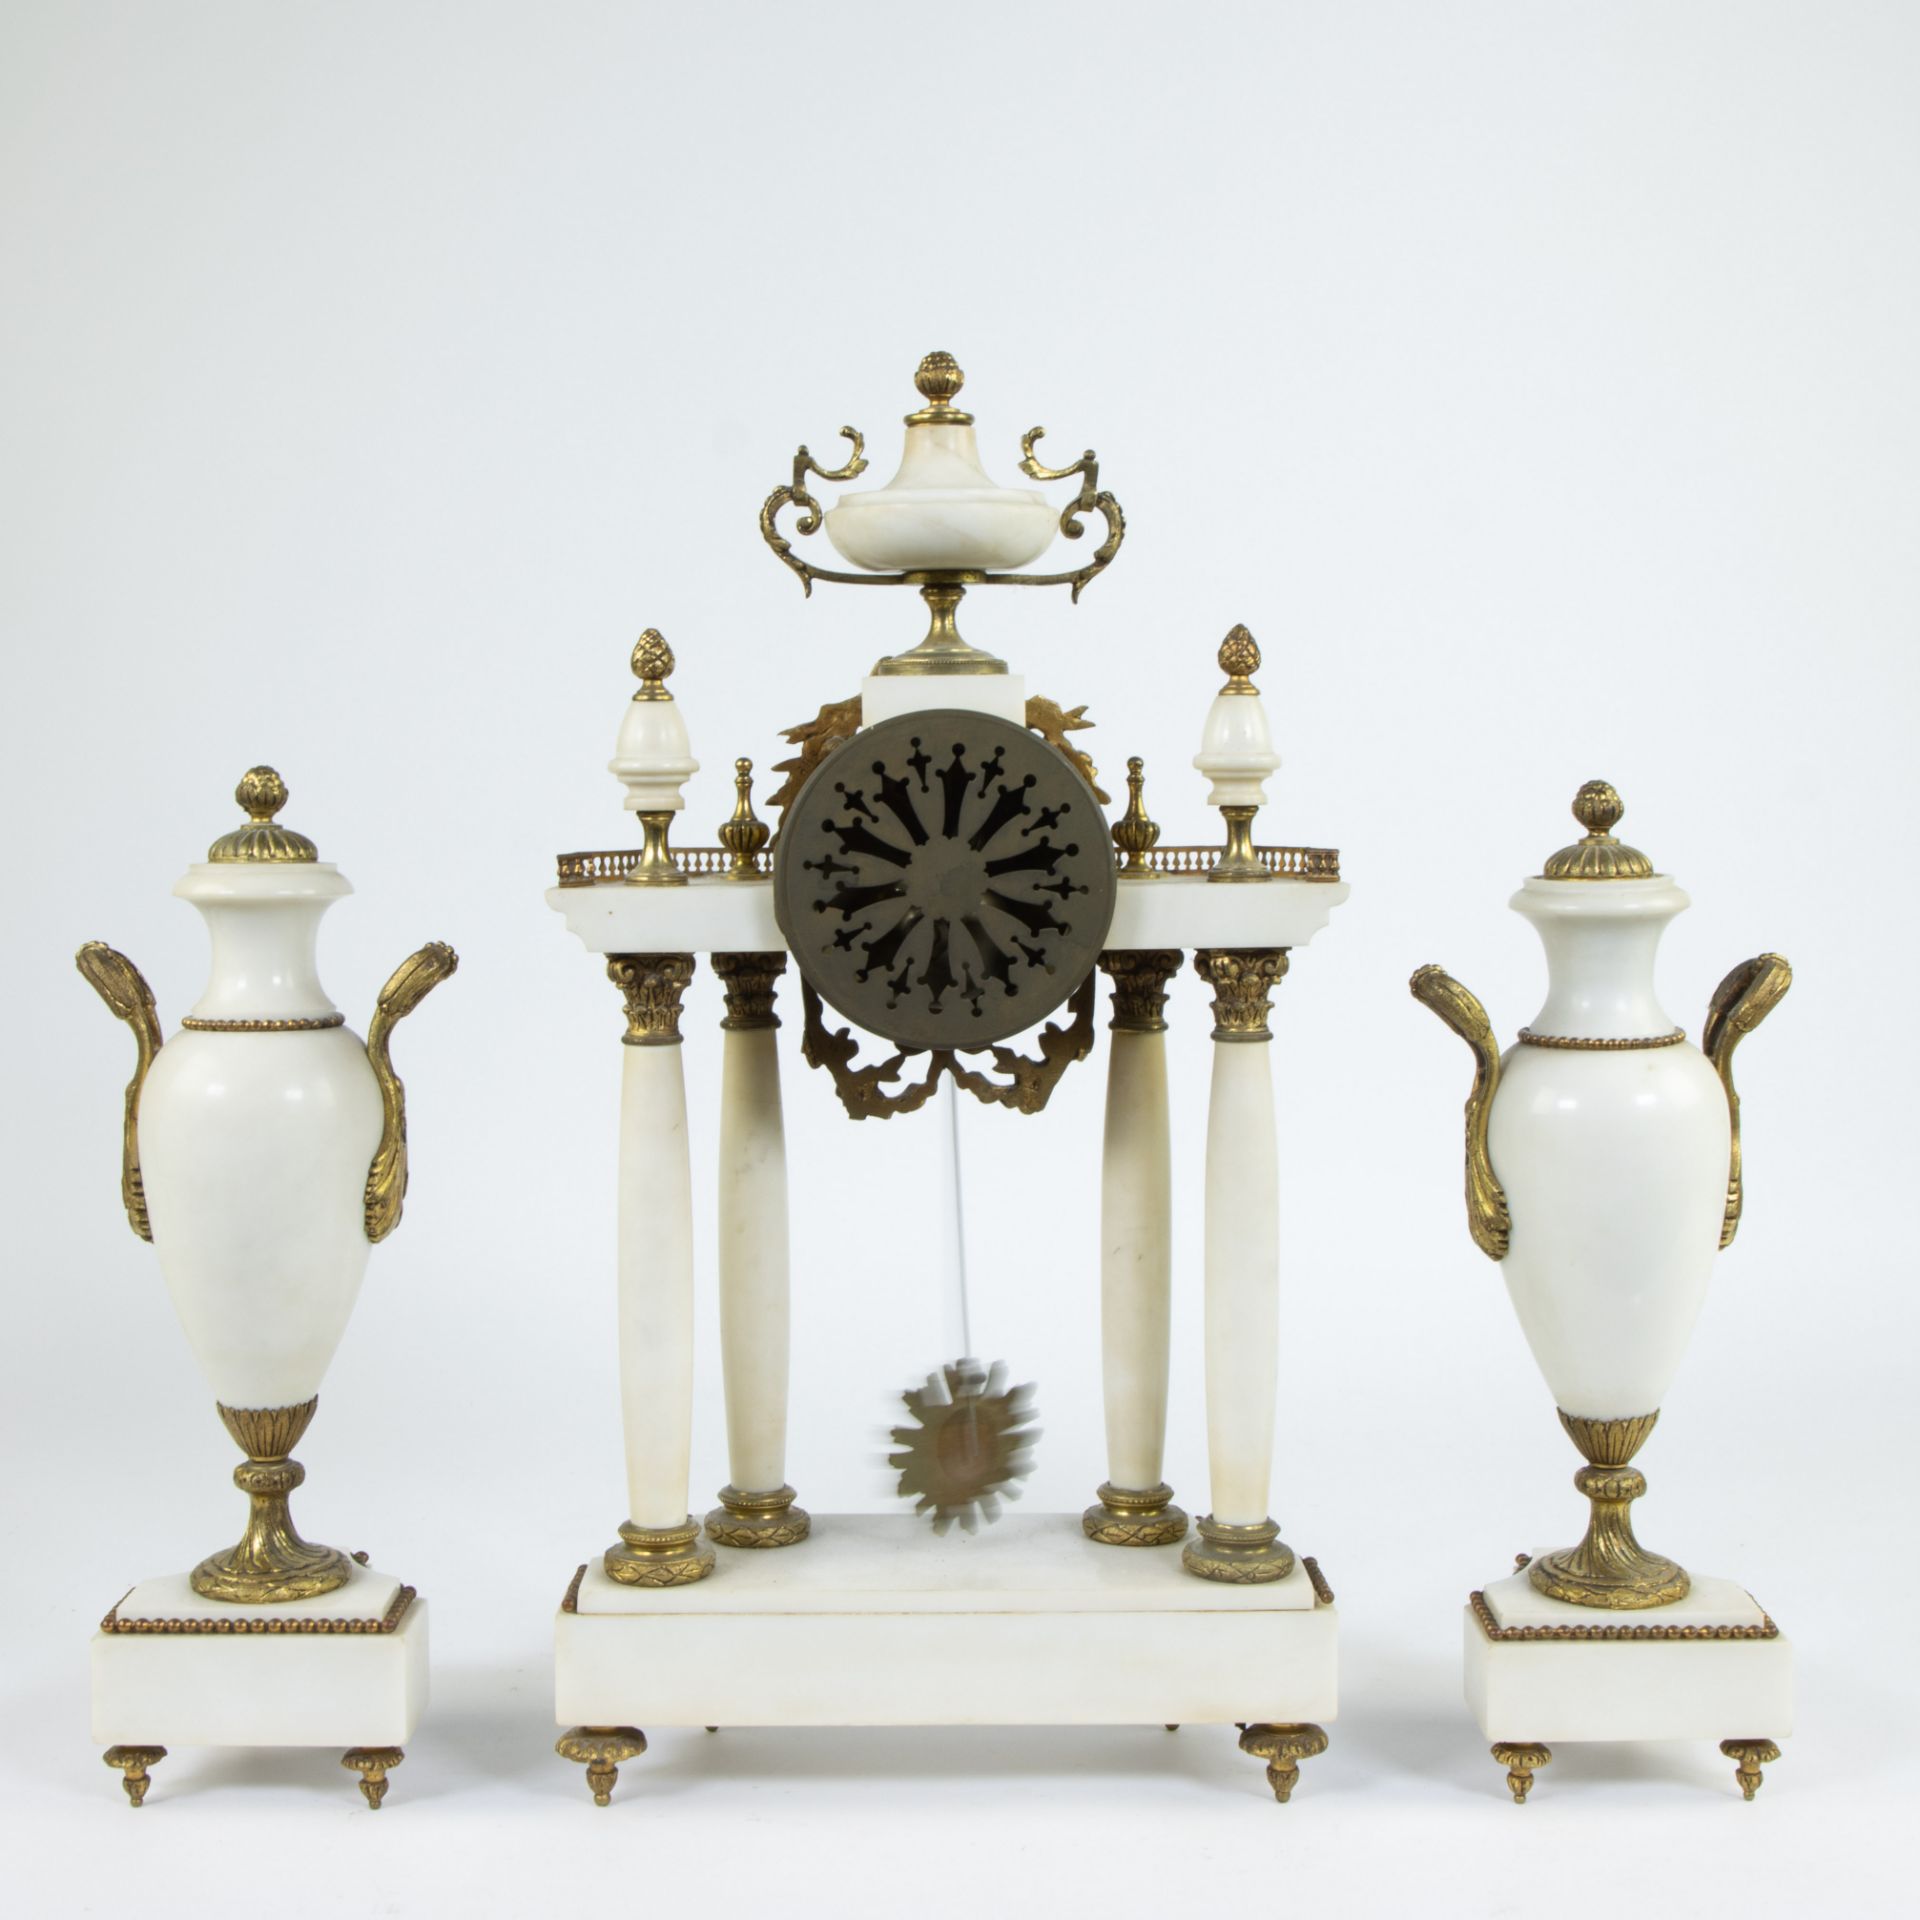 Three-part neoclassical garniture in bronze and white marble, consisting of a pair of cassolettes an - Image 3 of 4